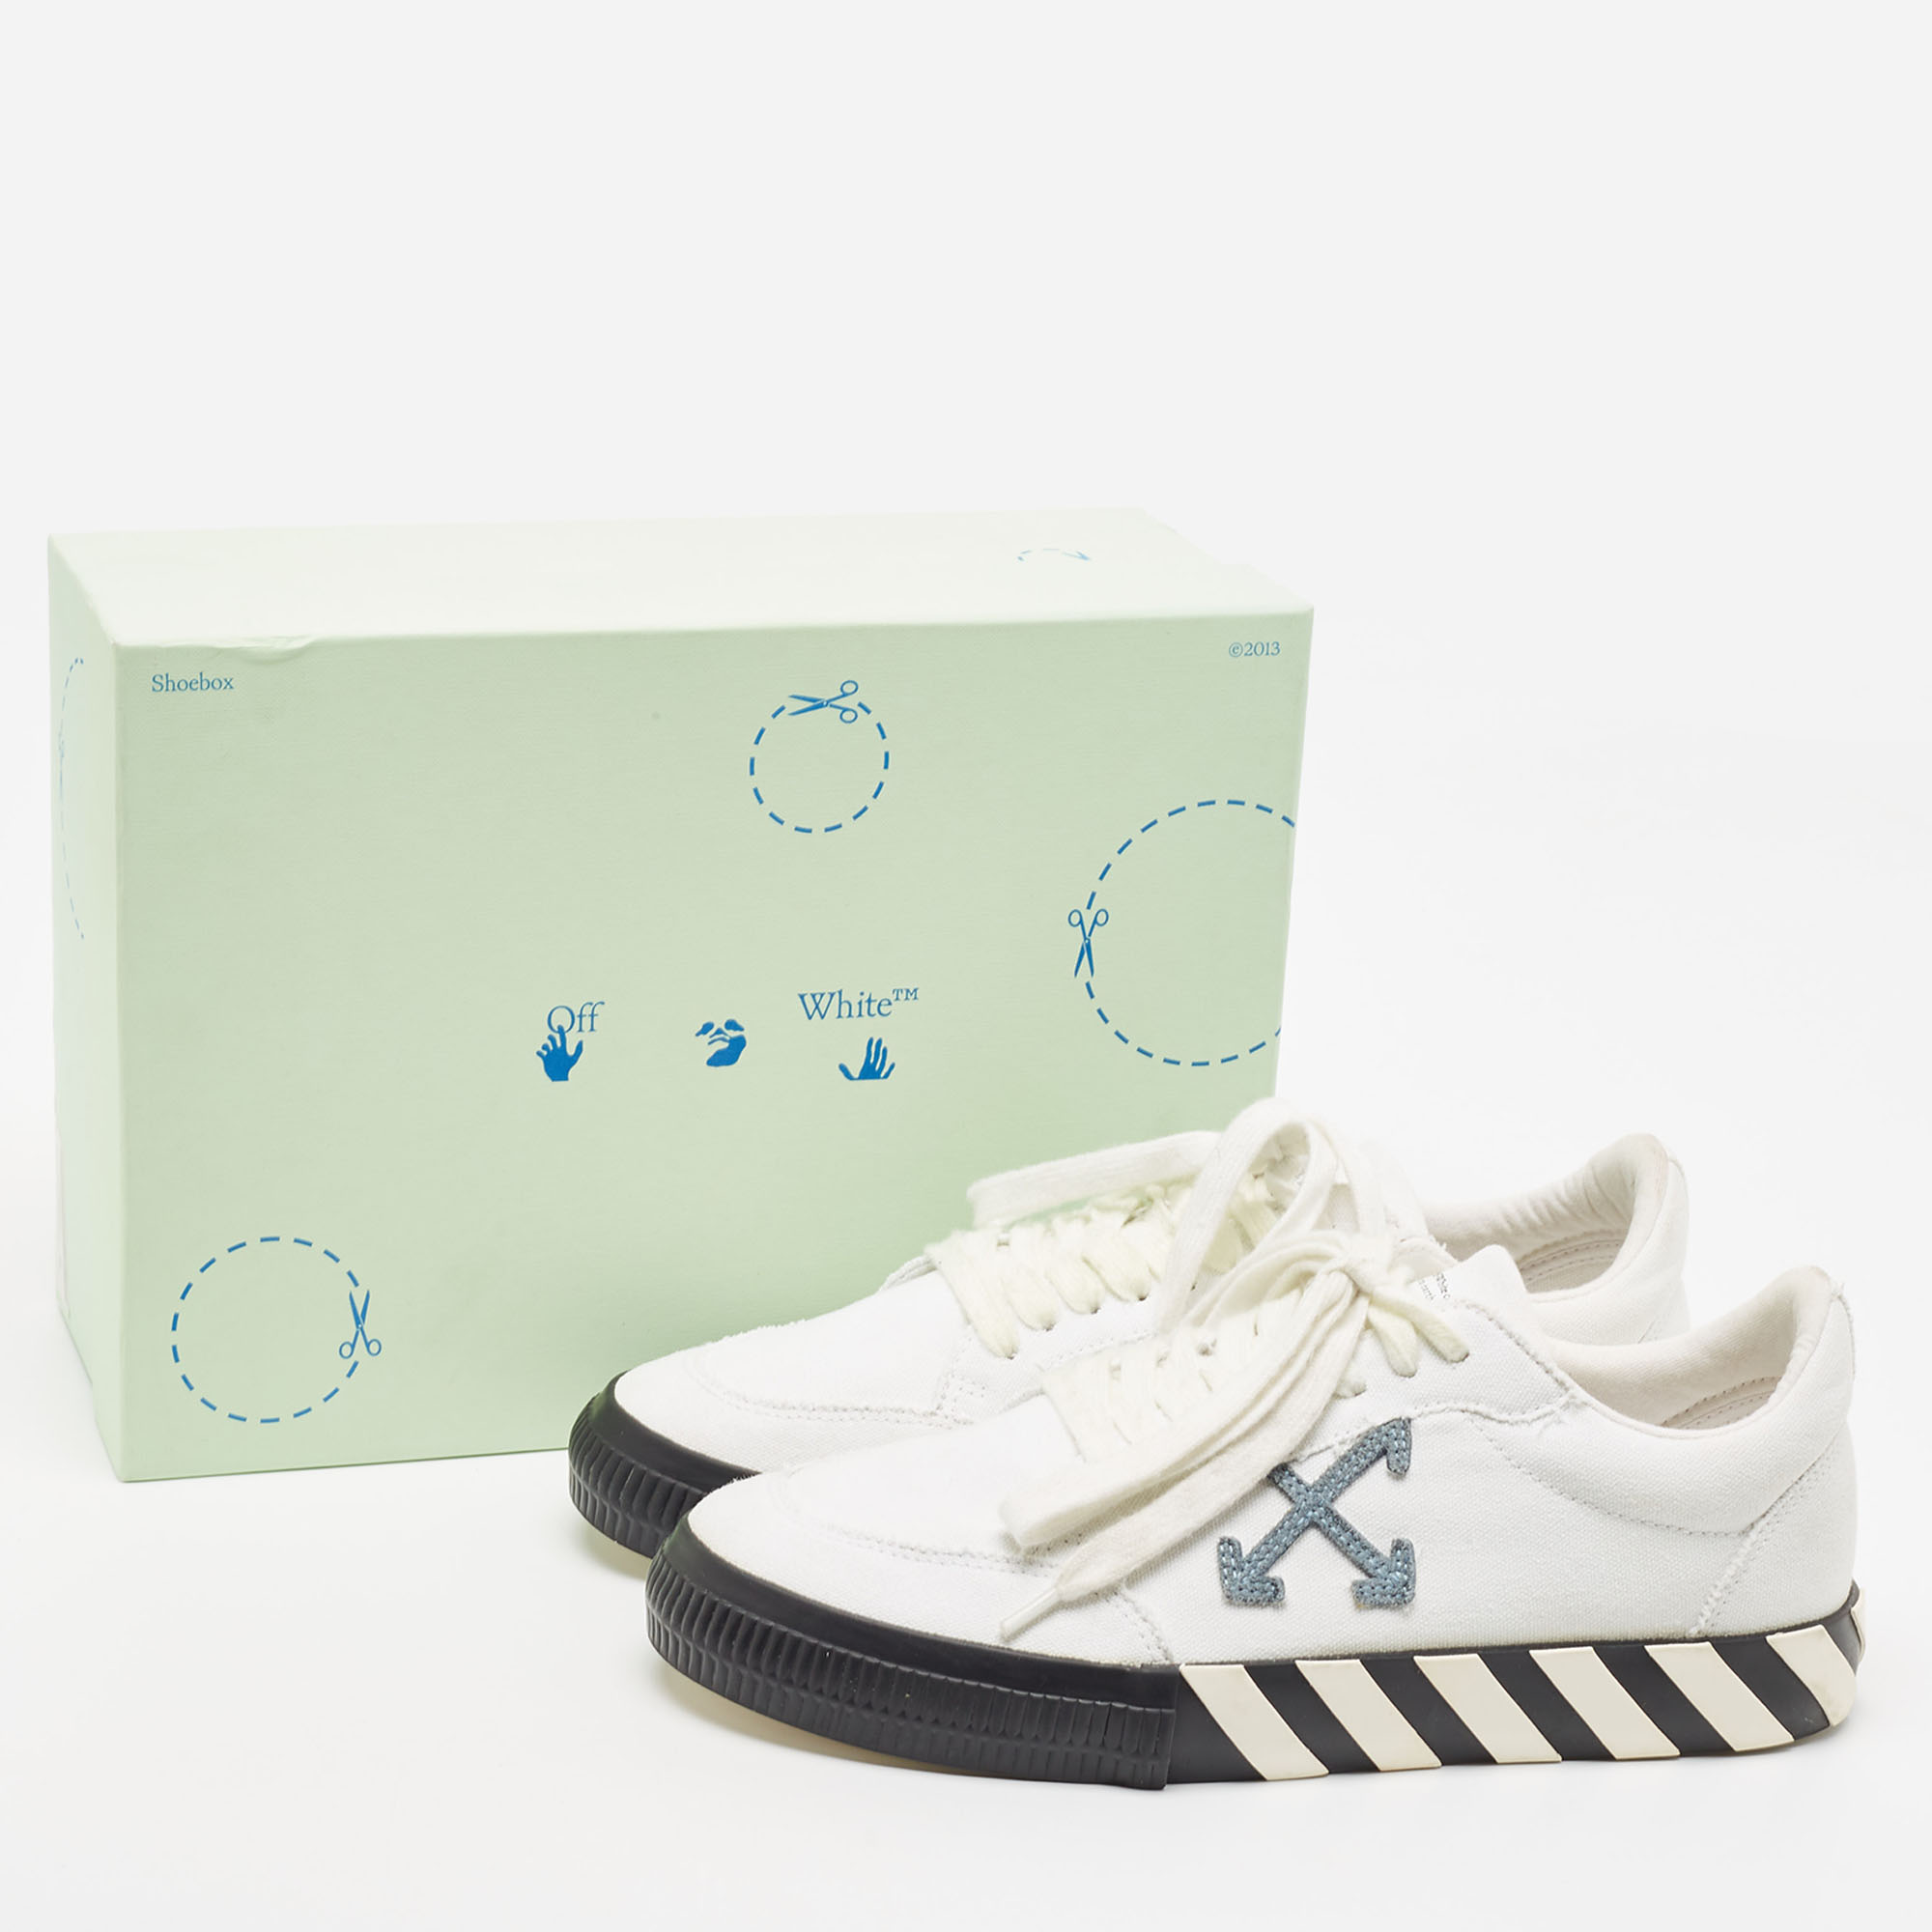 Off-White White Canvas Vulcanized Low Top Sneakers Size 42